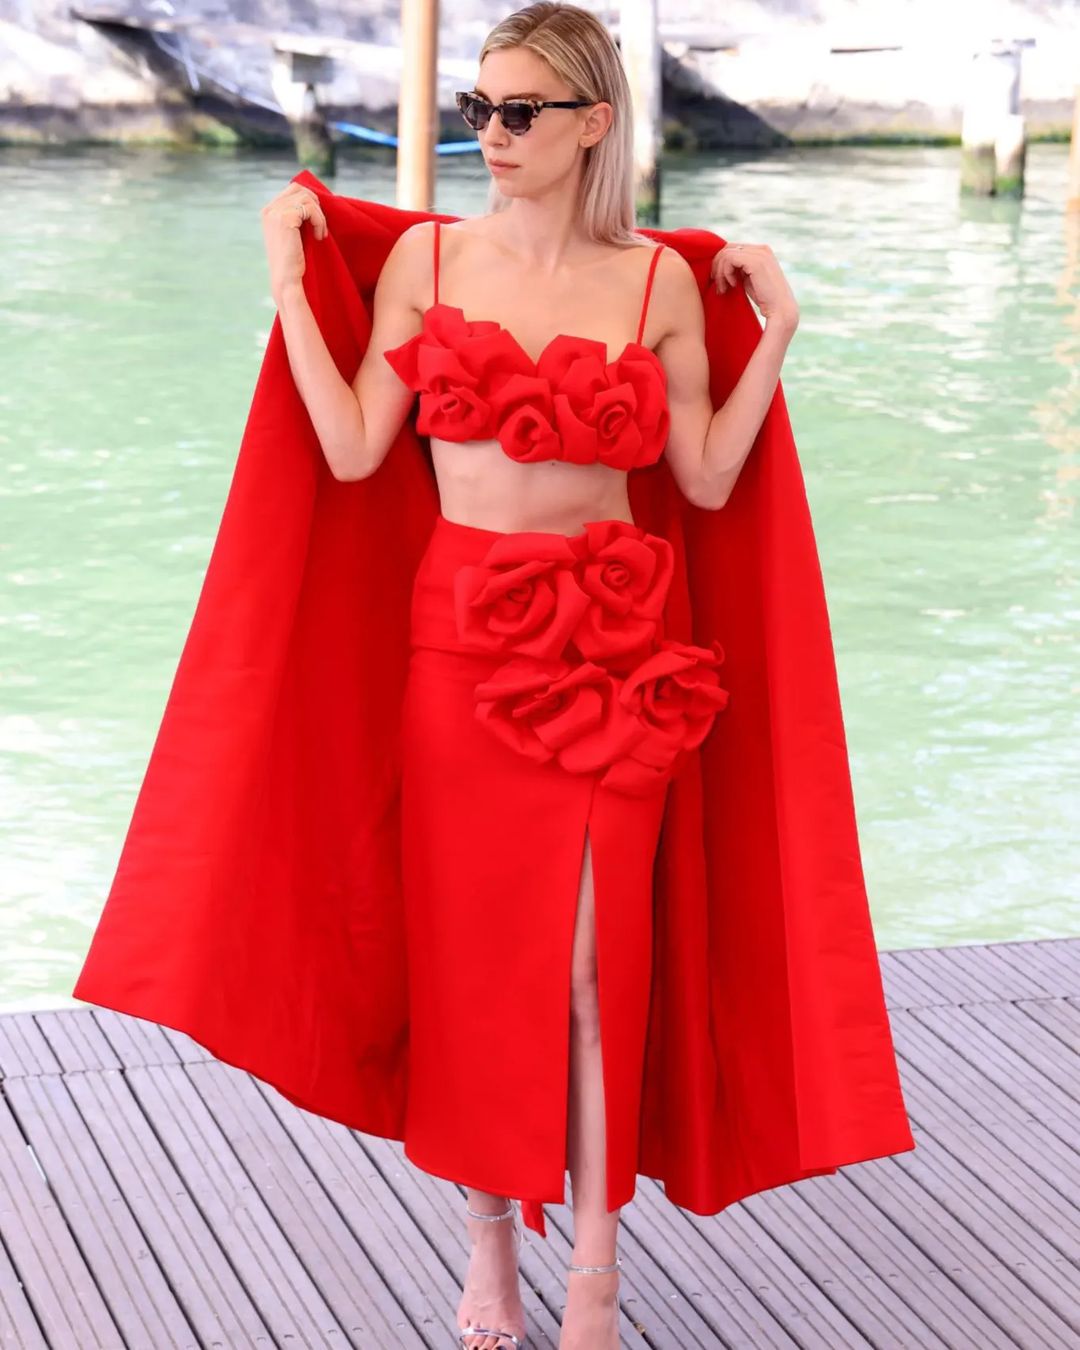 vanessa kirby red rose outfit